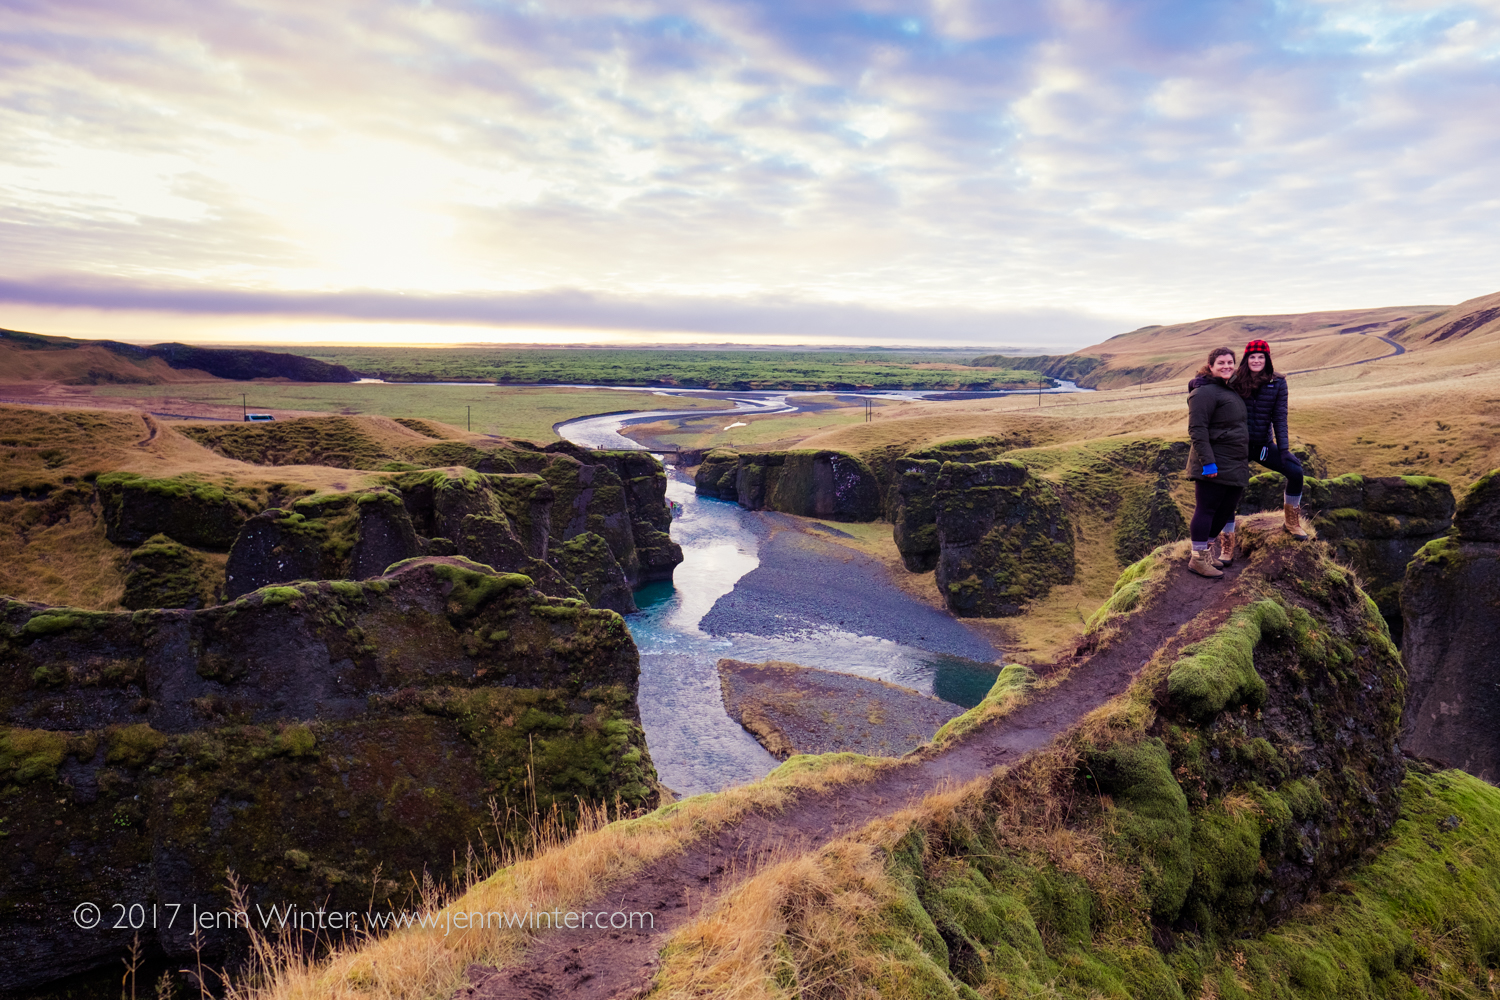 Iceland – 2 sisters, $20 bowls of soup & million dollar views